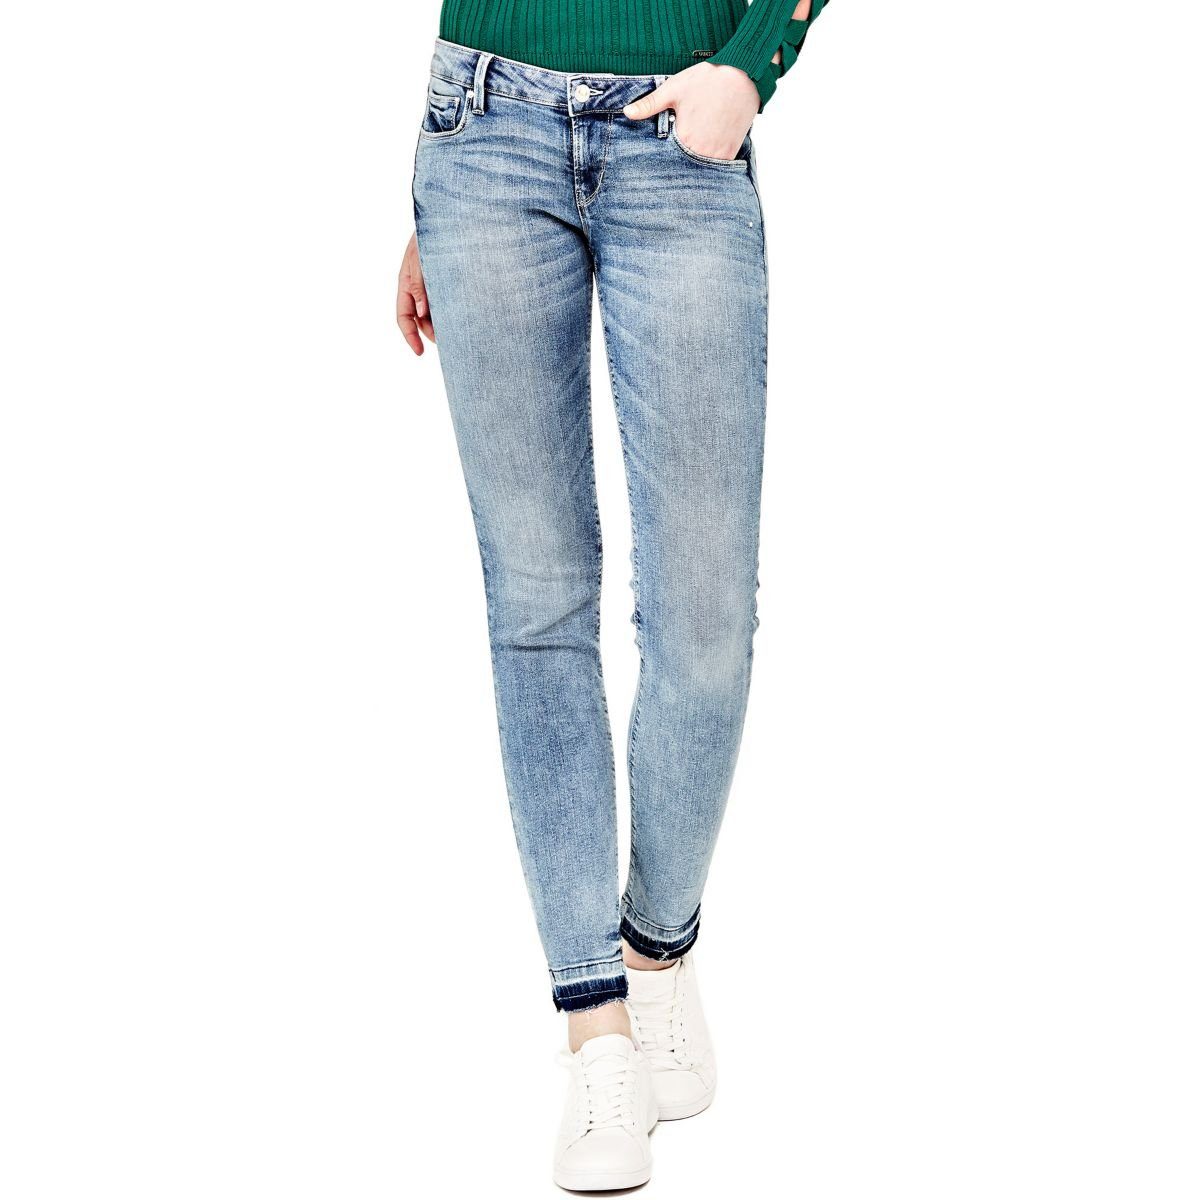 Otto - GUESS NU 15% KORTING: Guess jeans, met contrast-zoom